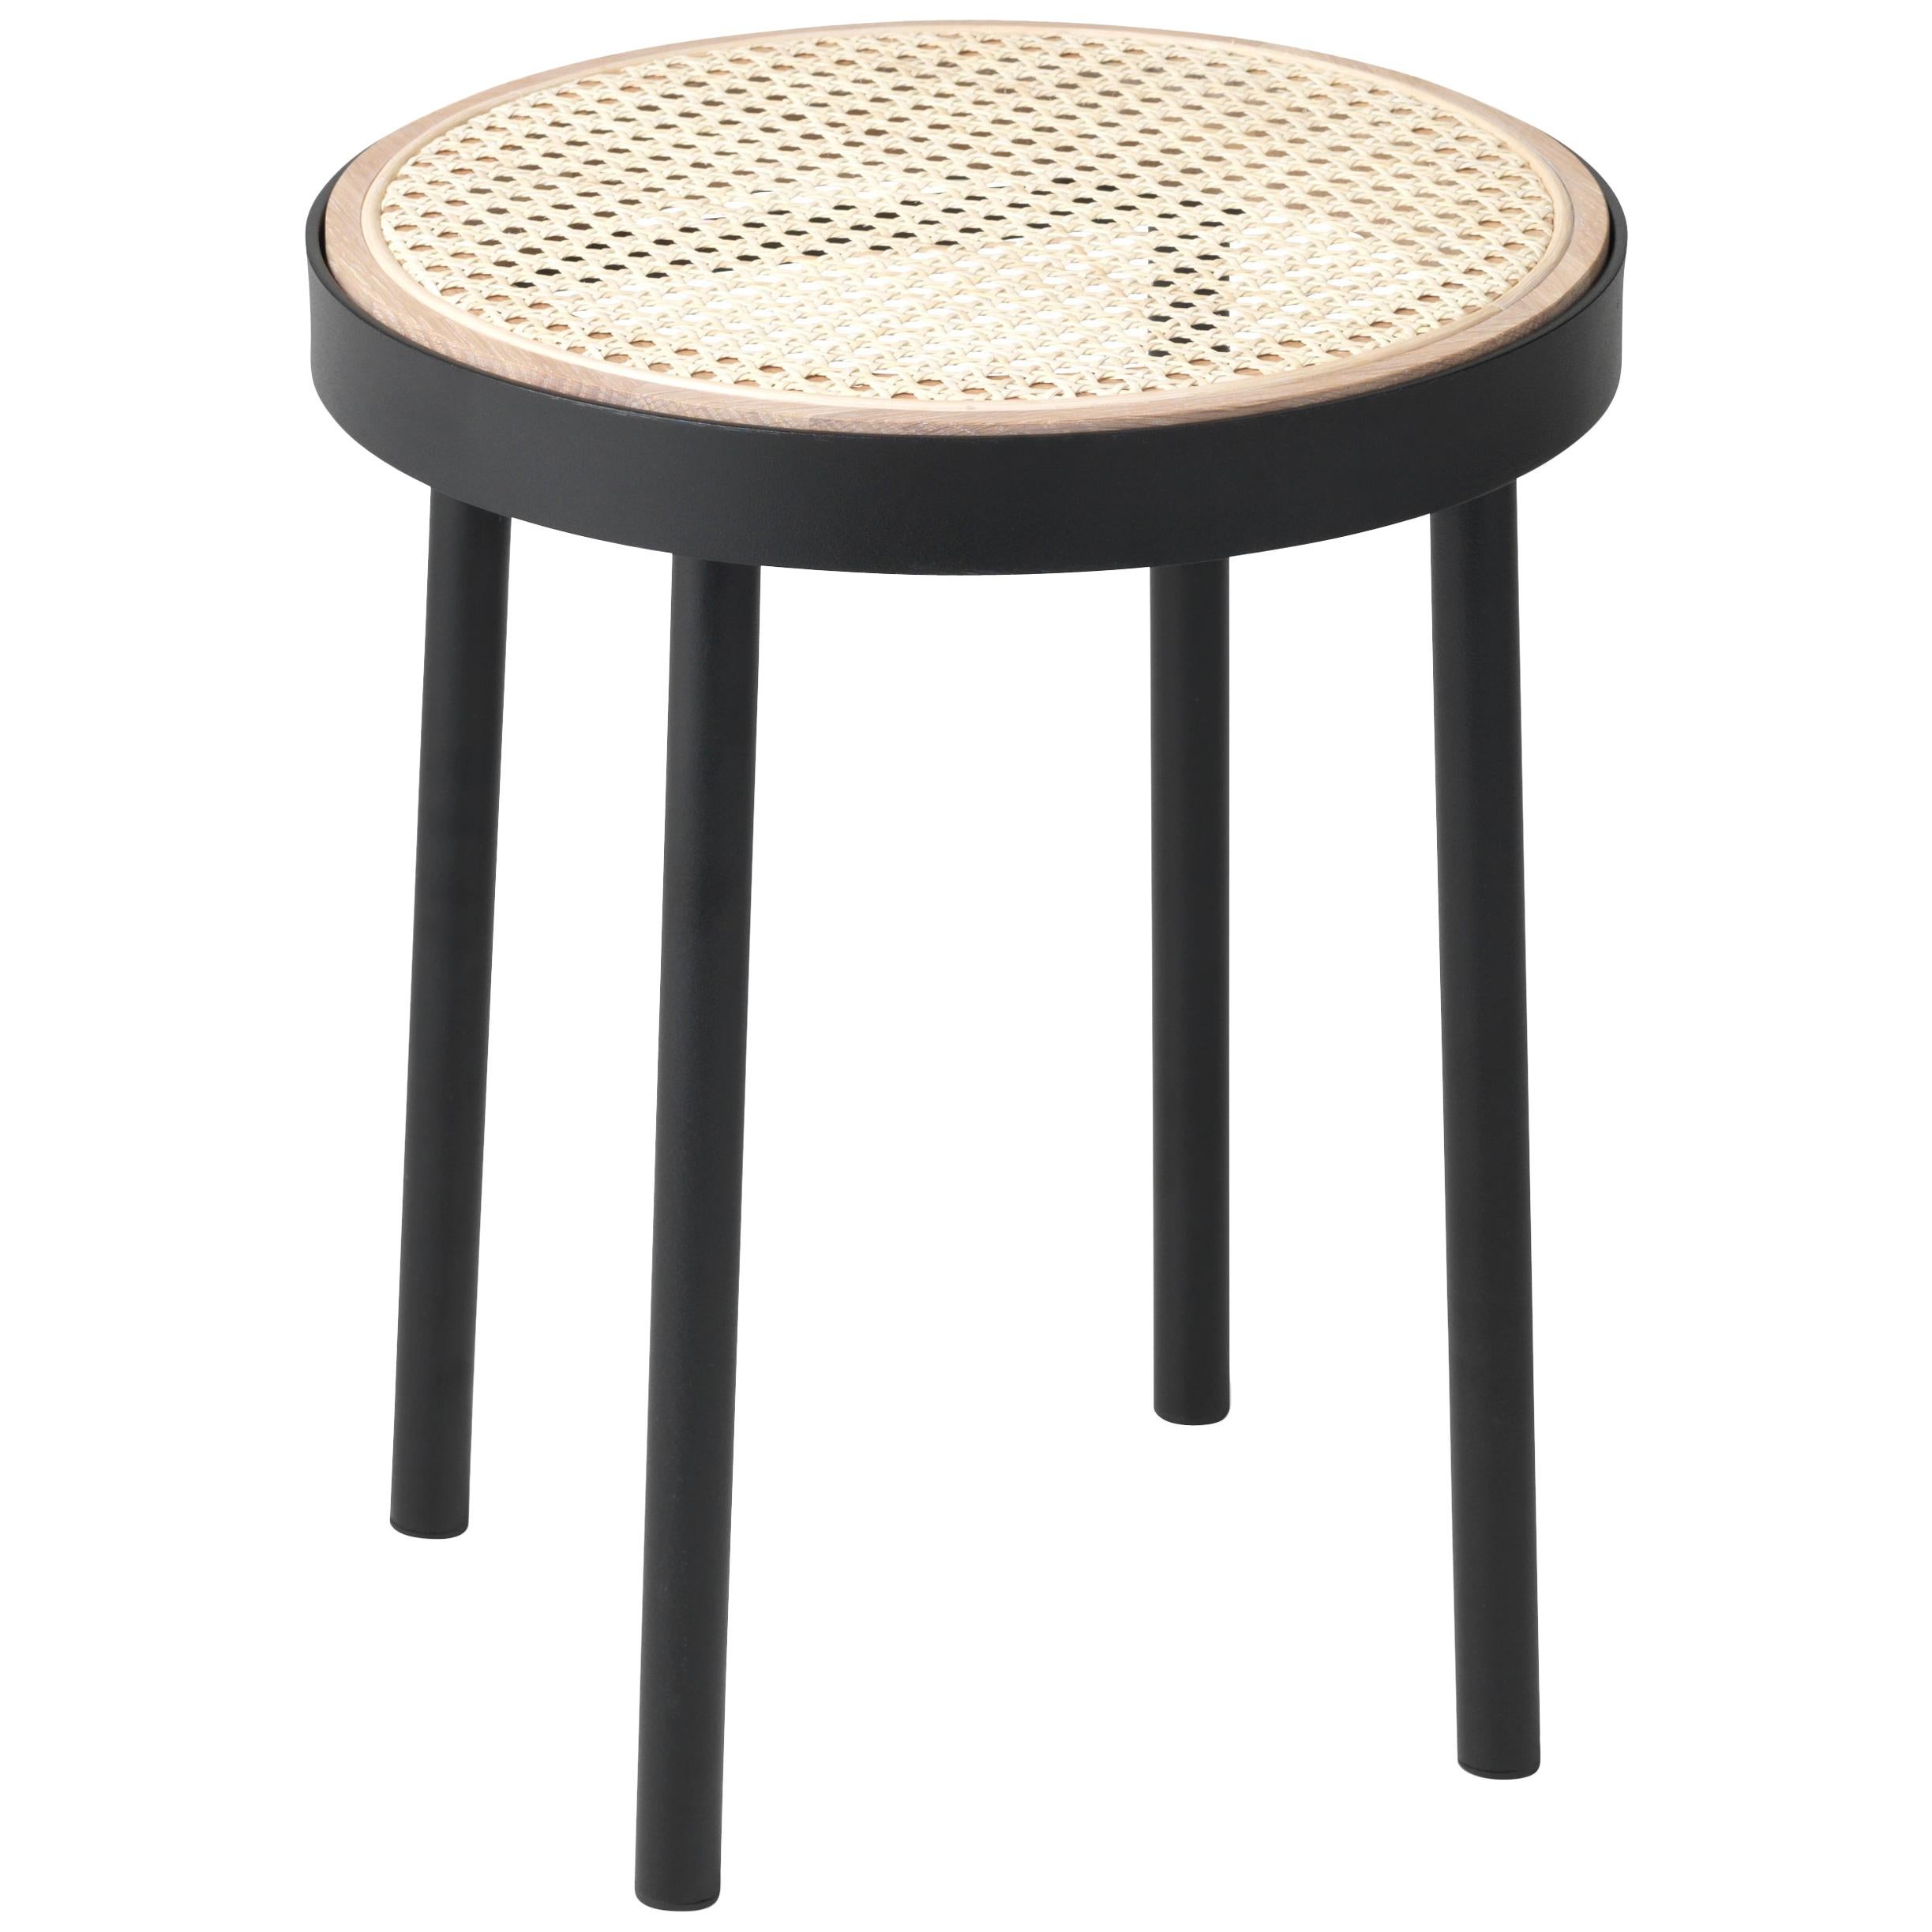 Be My Guest Cane Stool by Charlotte Høncke for Warm Nordic